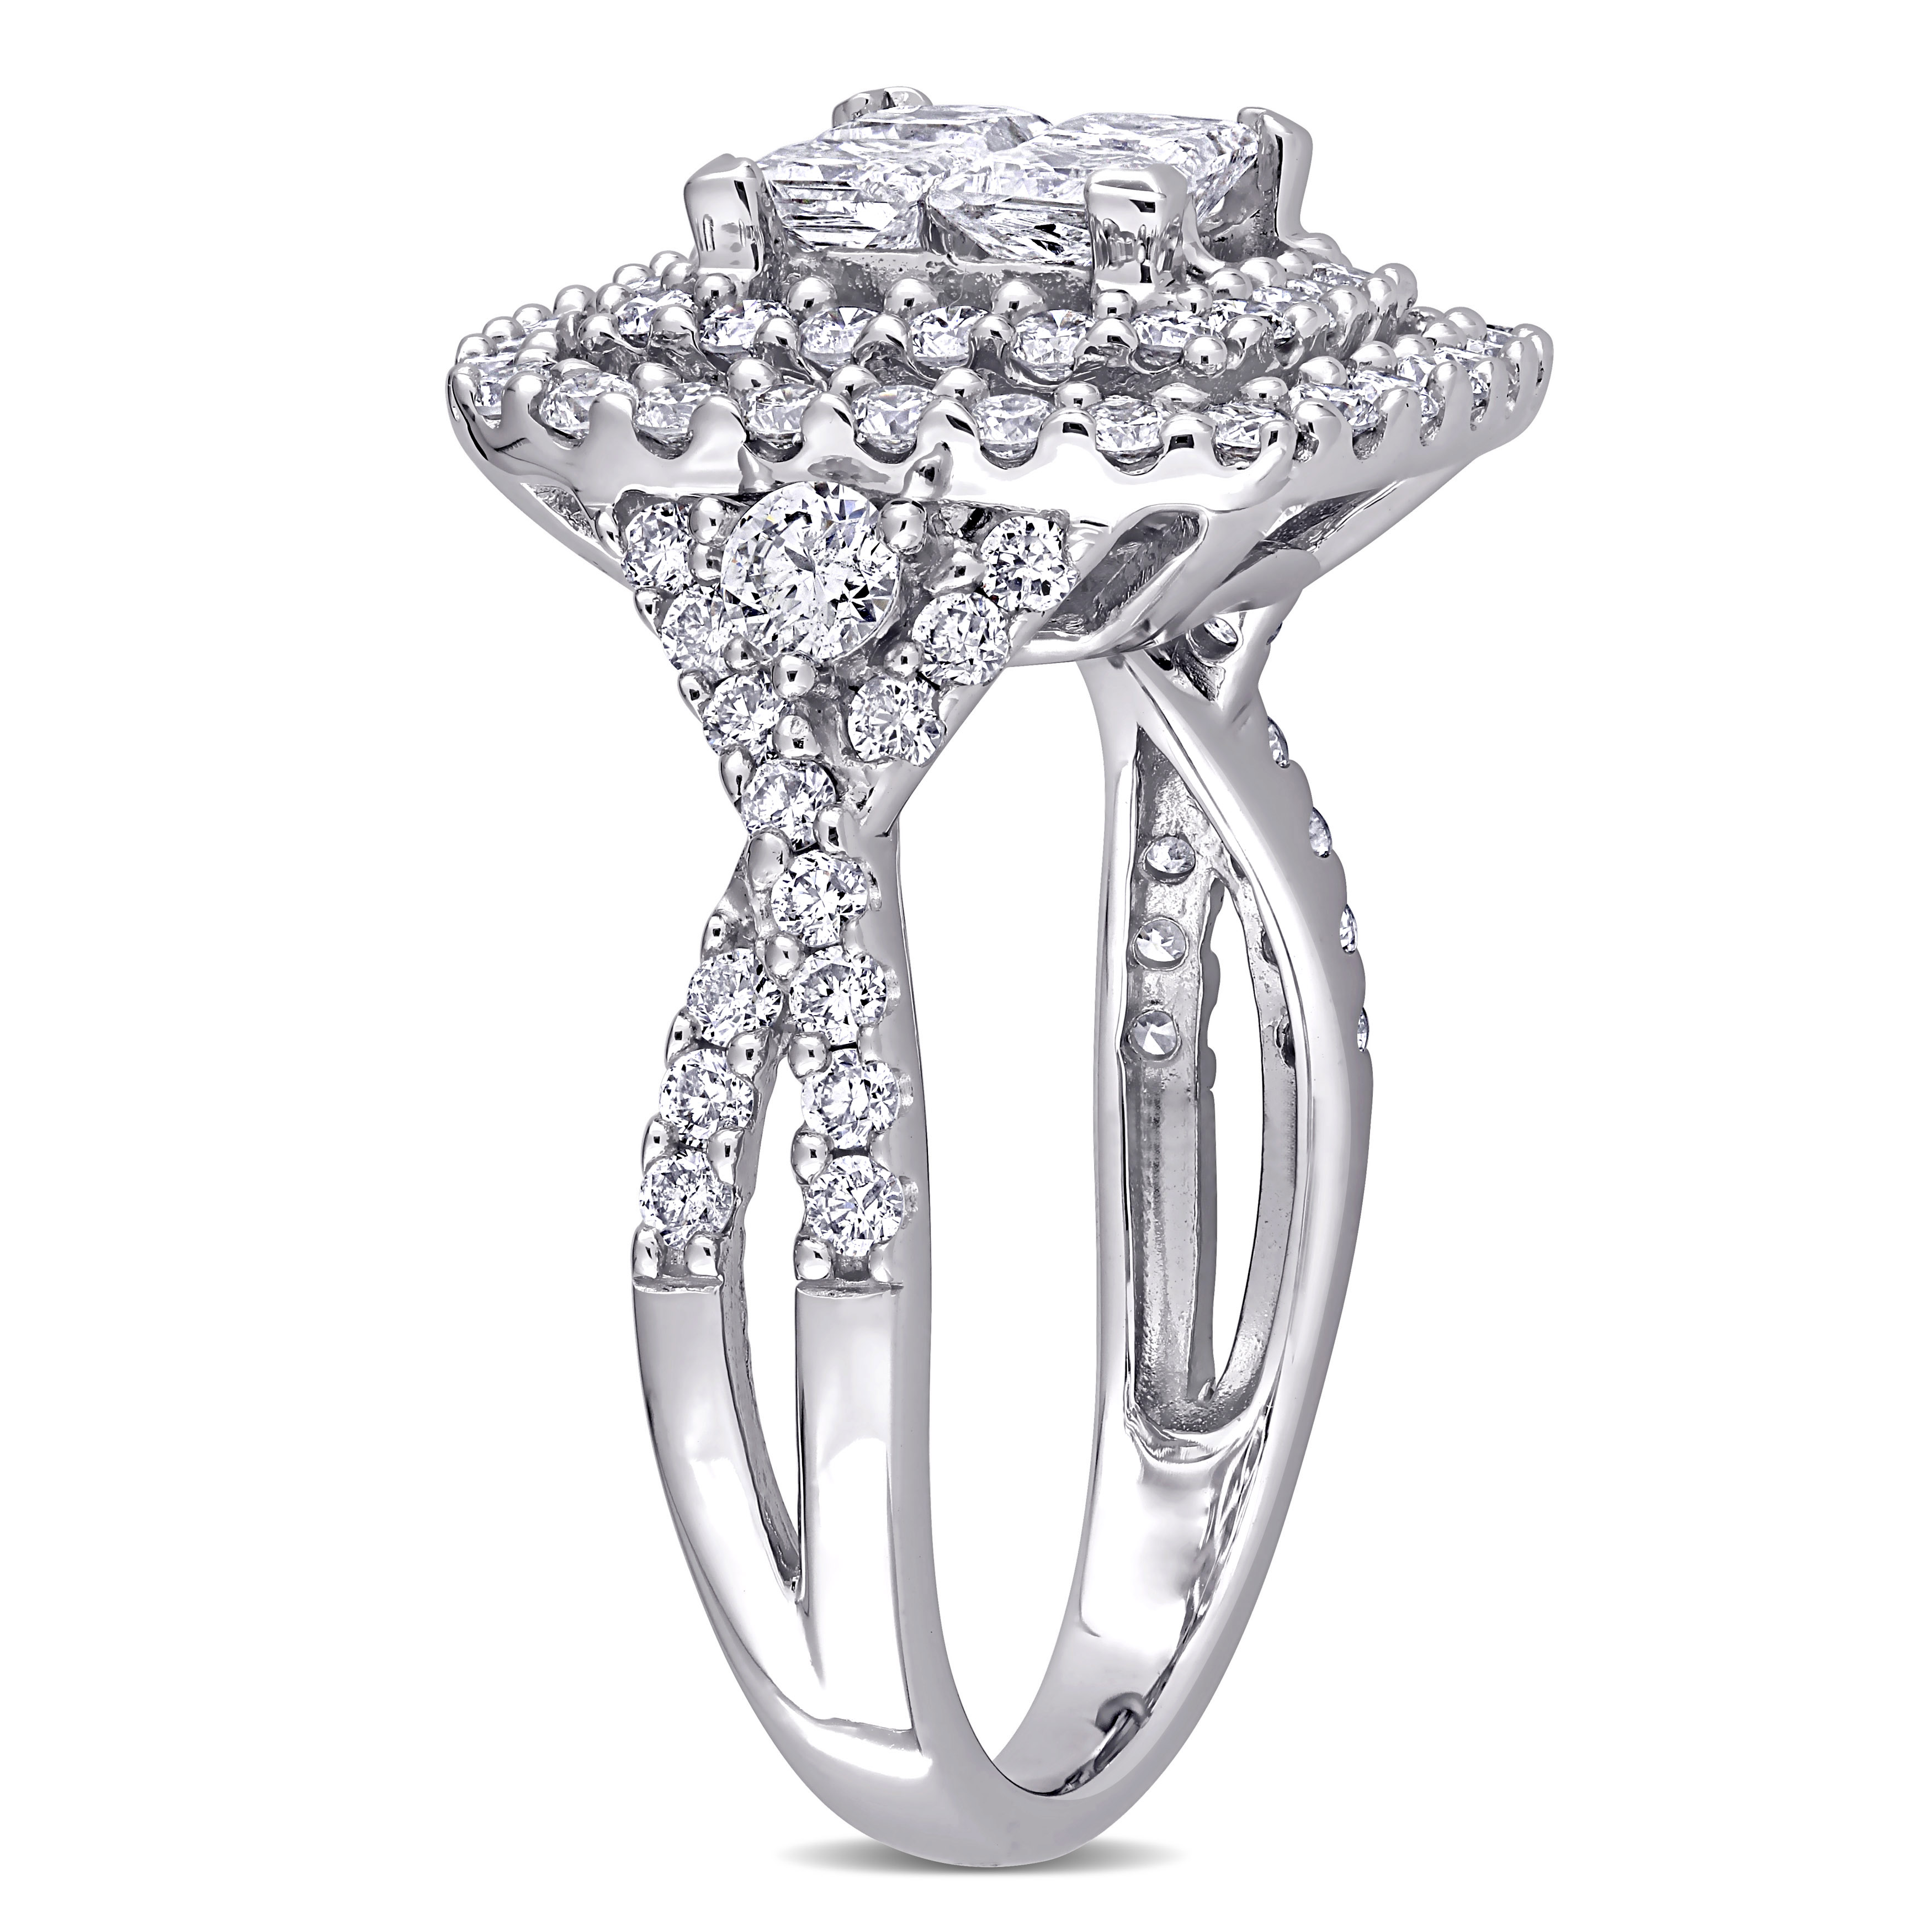 2 CT TW Princess and Round-Cut Diamond Halo Engagement Ring in 14k White Gold